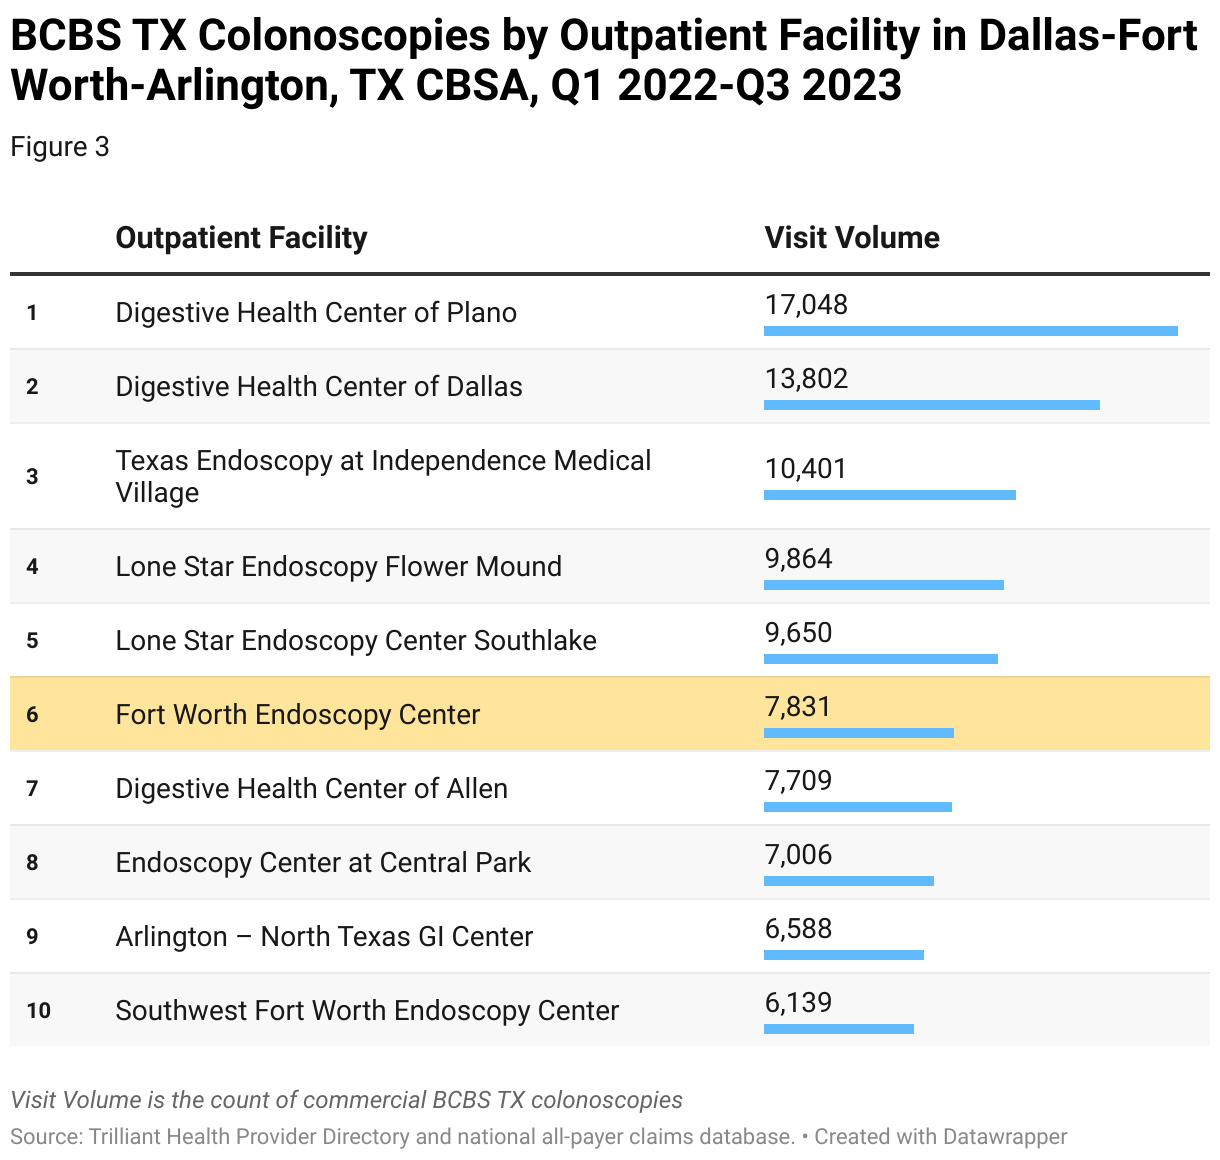 The table shows that Fort Worth Endoscopy Center has the 6th highest market share for colonoscopies in the Dallas-Fort Worth-Arlington, TX CBSA.